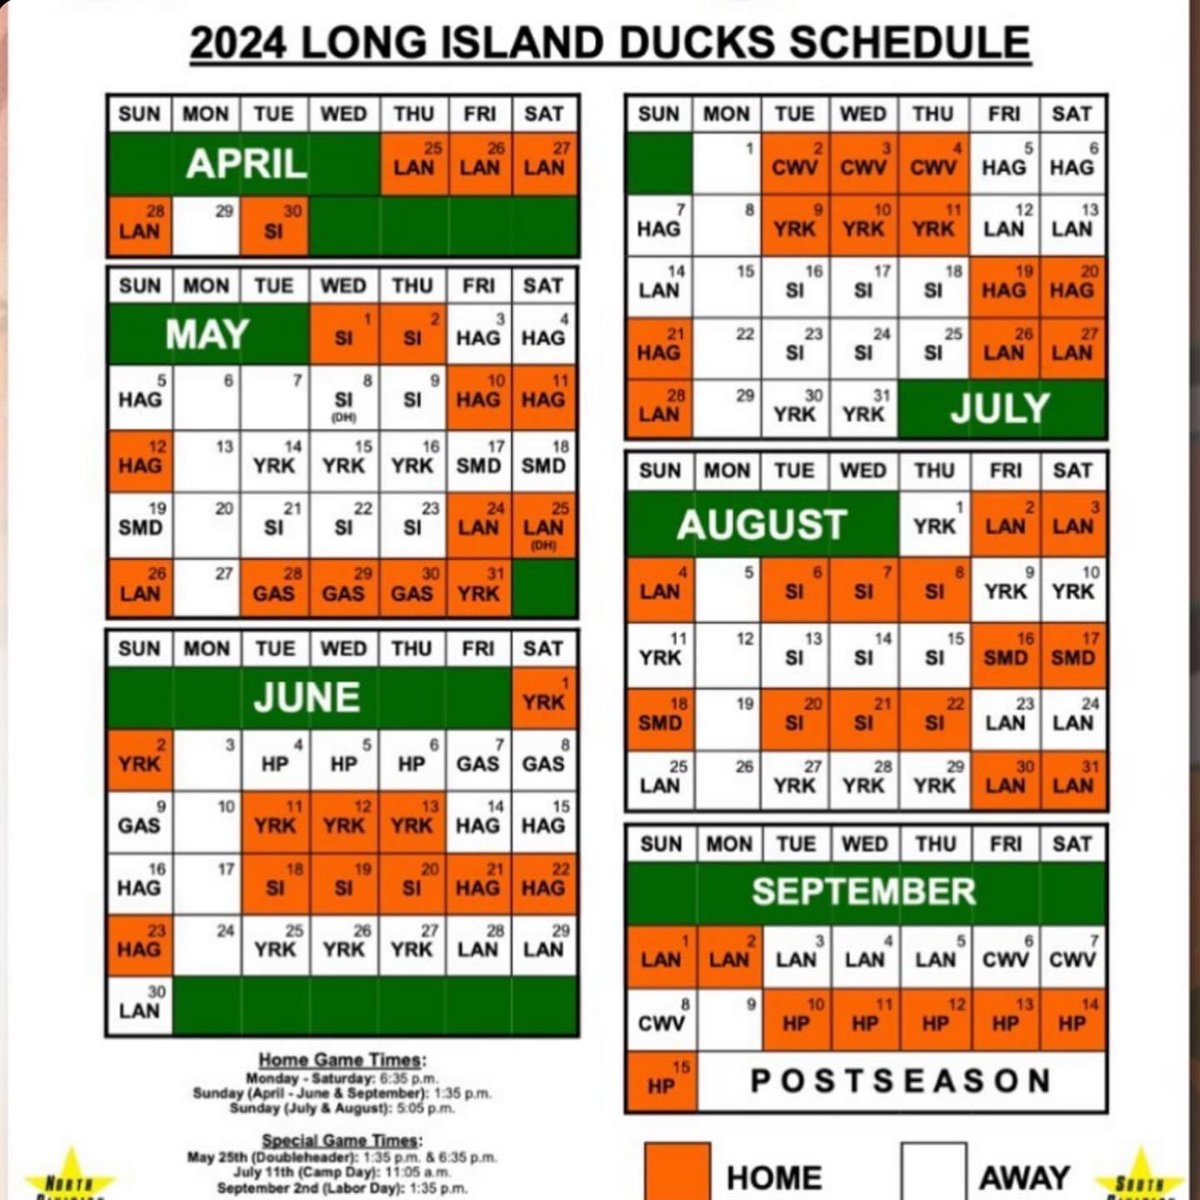 You know summer is almost here when the @LIDucks season starts! ☀️⚾️🦆 #discoverlongisland Lots of exciting events happening at the ballpark this month! Get your tickets now! 🙌 🍔 “Tap Room Fridays” @taproomofficial 🎆 5/11: Fireworks Spectacular 🥞 5/12: Mother’s Day…